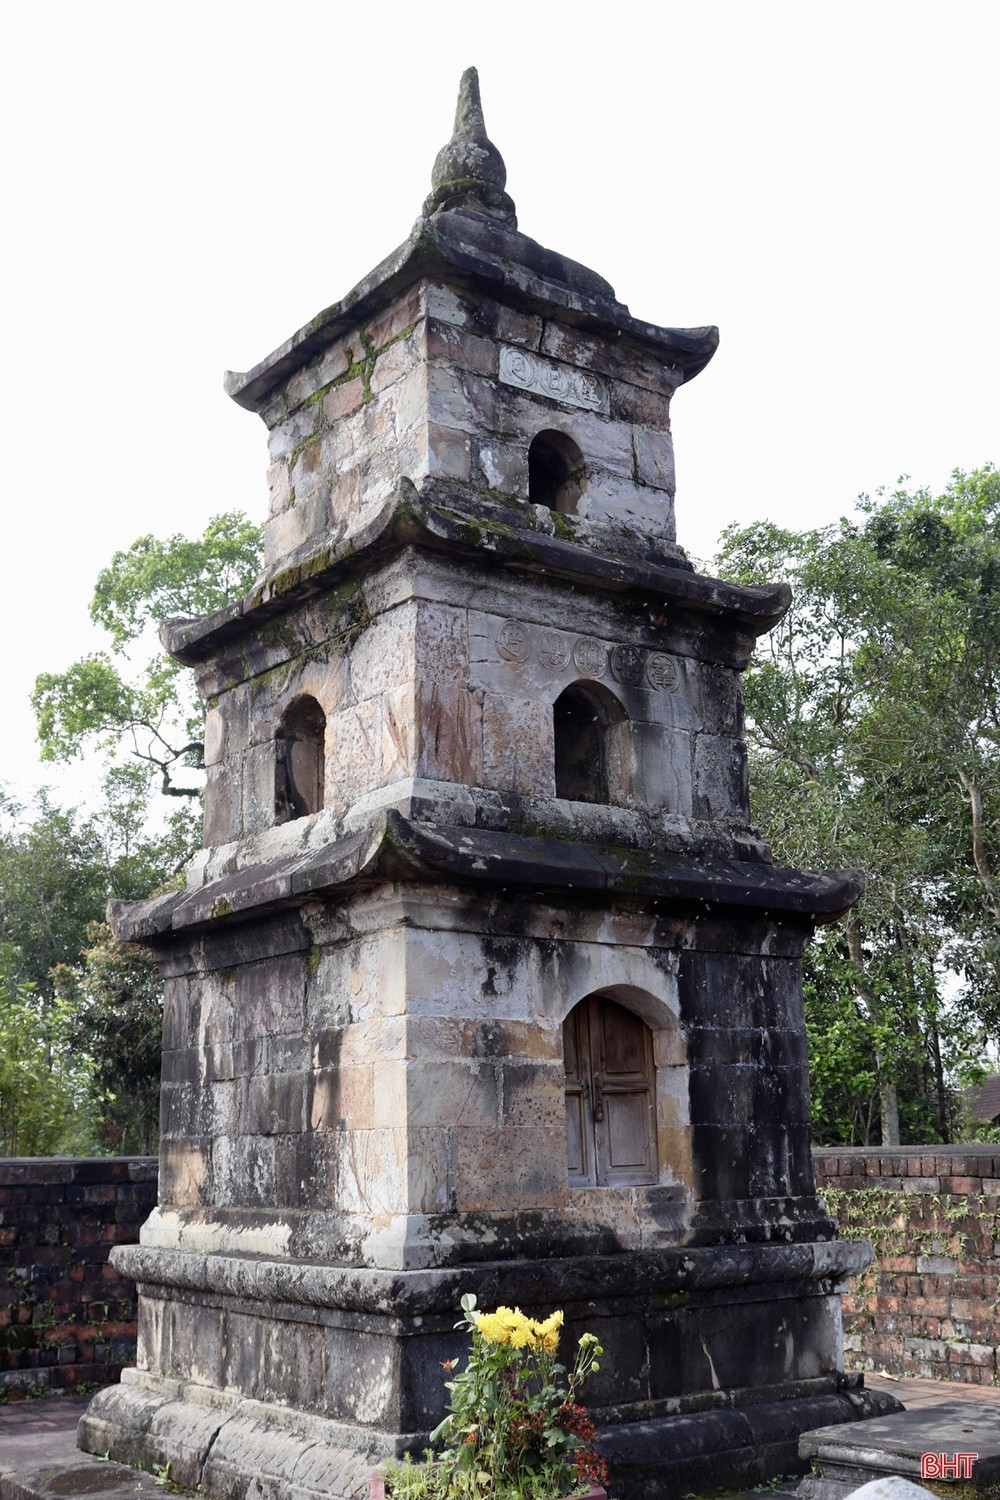 Unique and sophisticated 500-year-old stone tower, rare in Ha Tinh land - Photo 3.